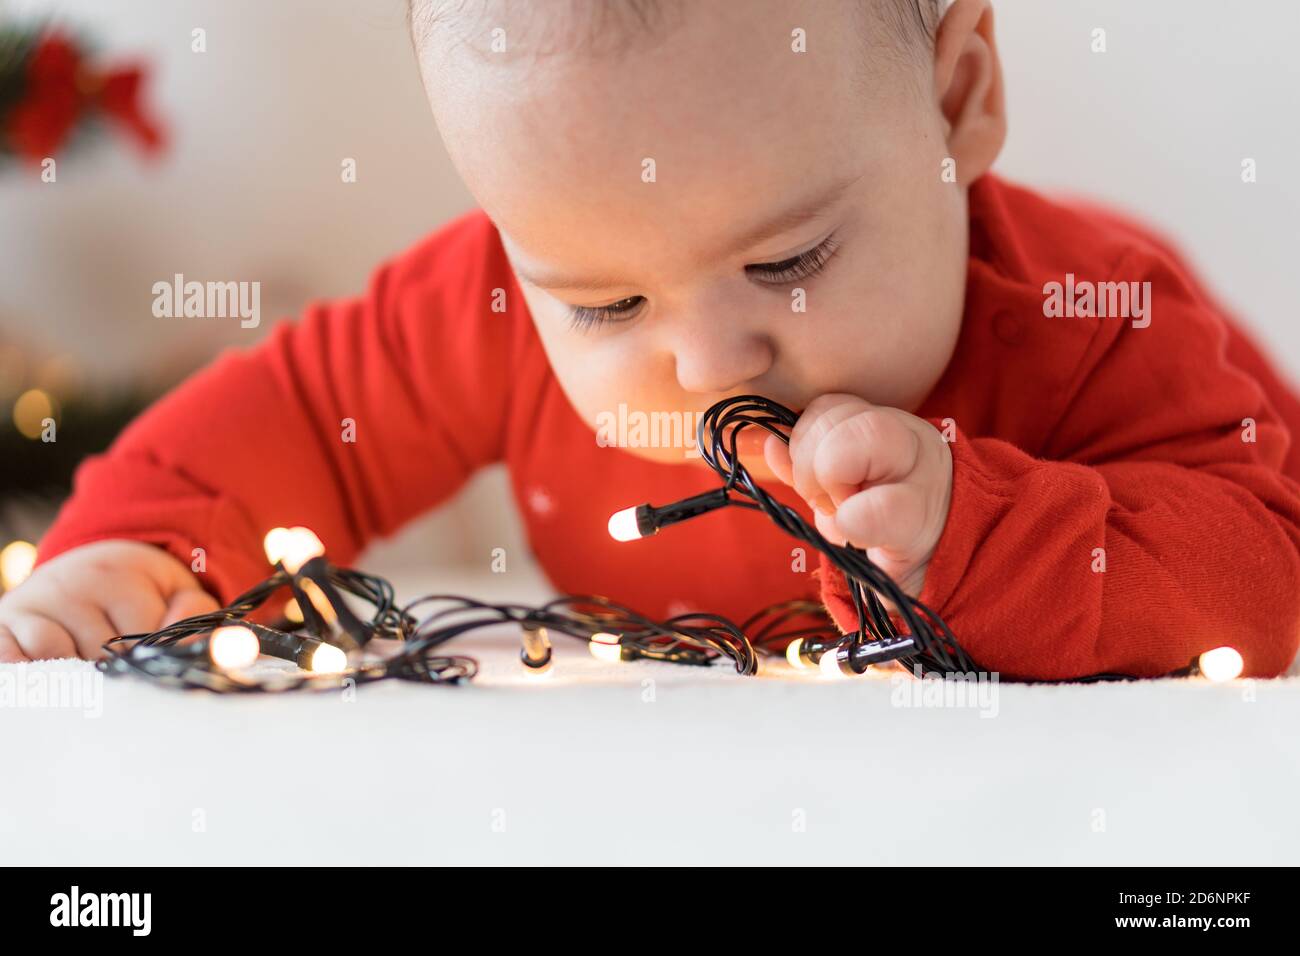 merry christmas and happy new year, infants, childhood, holidays concept - close-up 6 month old newborn baby in red clothes on his tummy crawls with Stock Photo